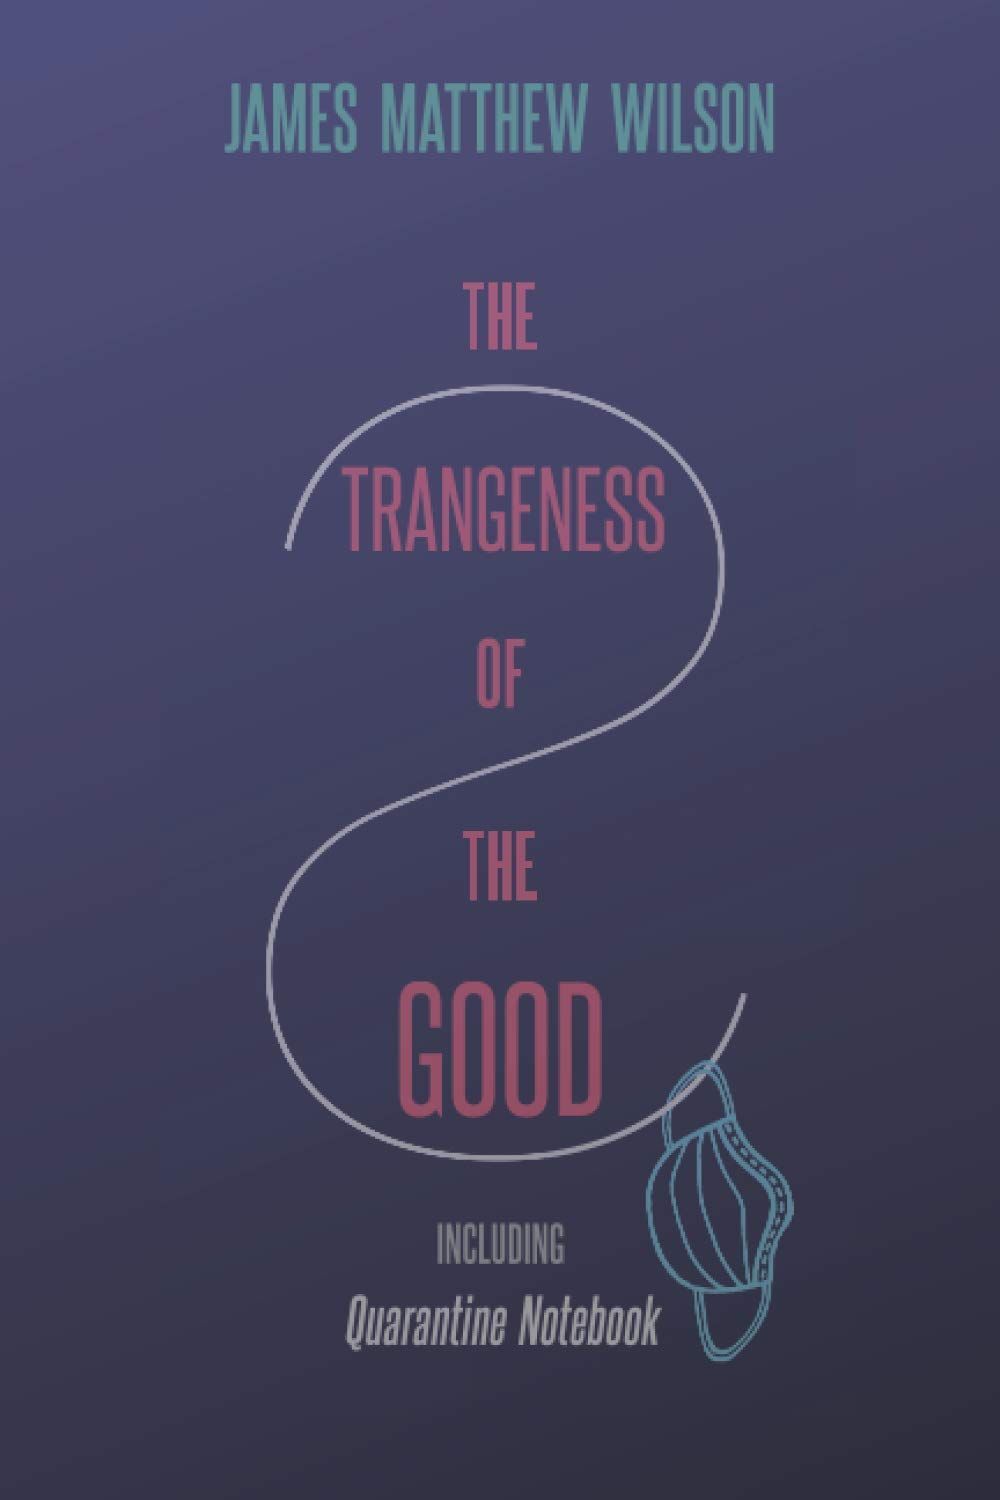 To Draw the Mortal Hours: On James Matthew Wilson’s “The Strangeness of the Good”